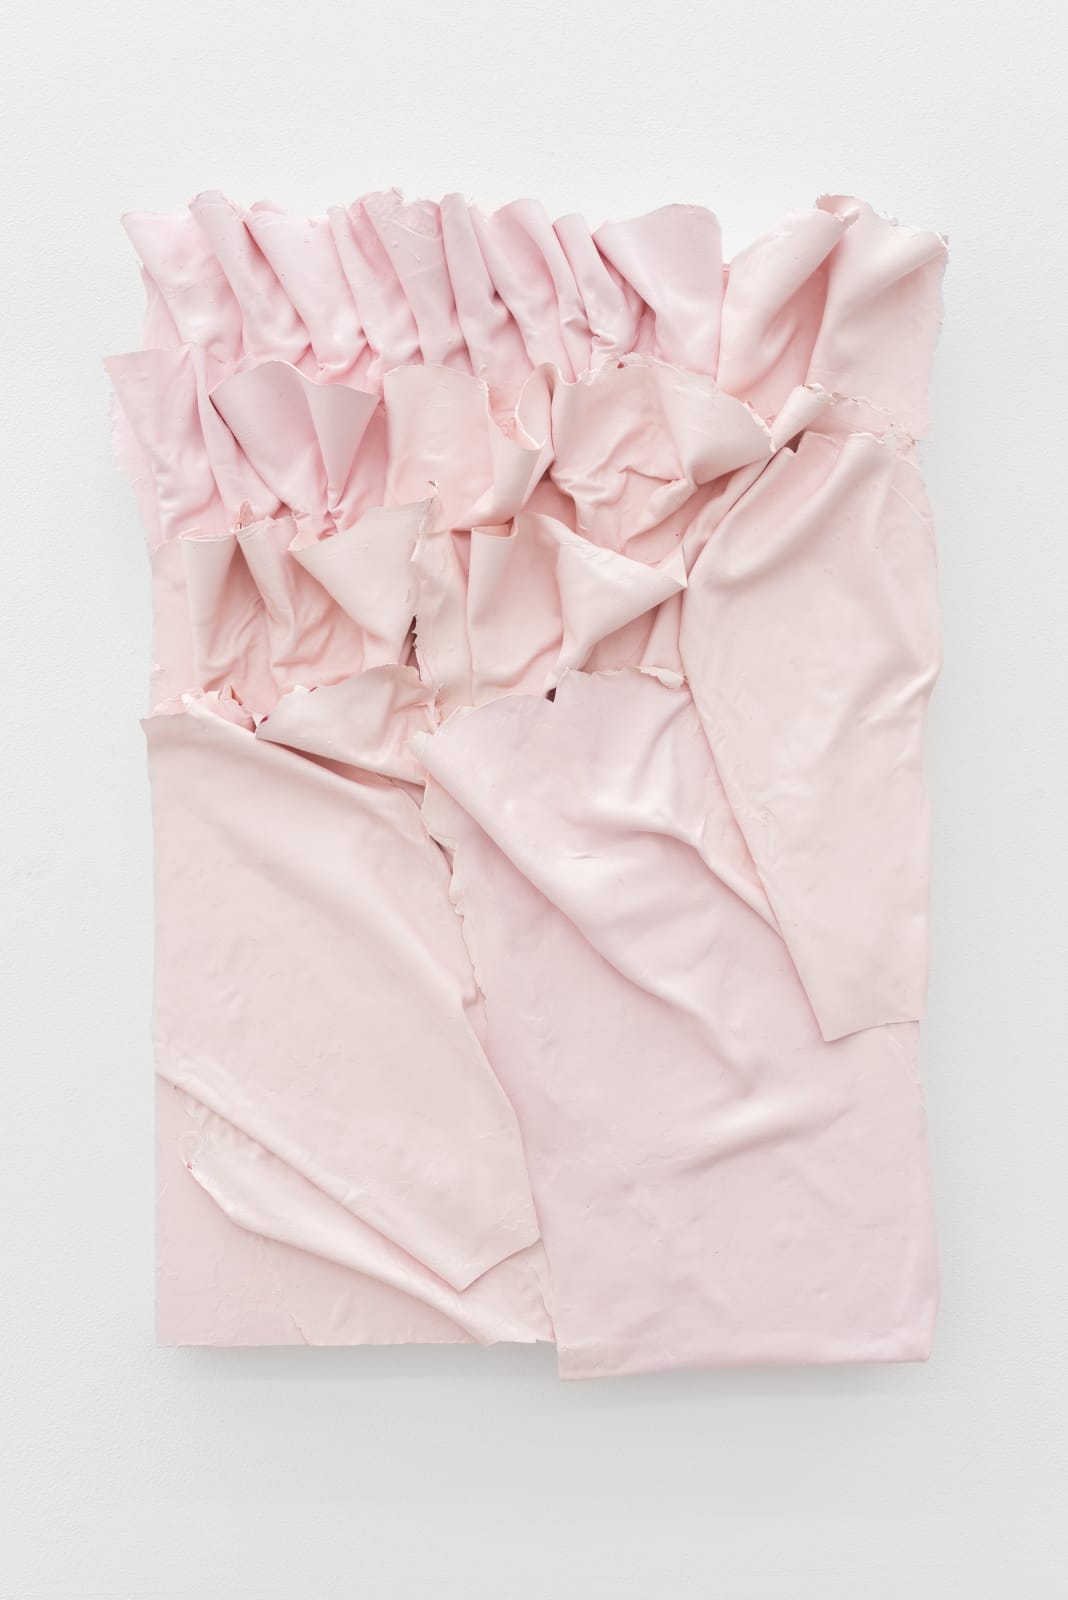 Gabrielle Kruger, Pleated Painting, 2019 | Gallery MOMO (Pty) ltd